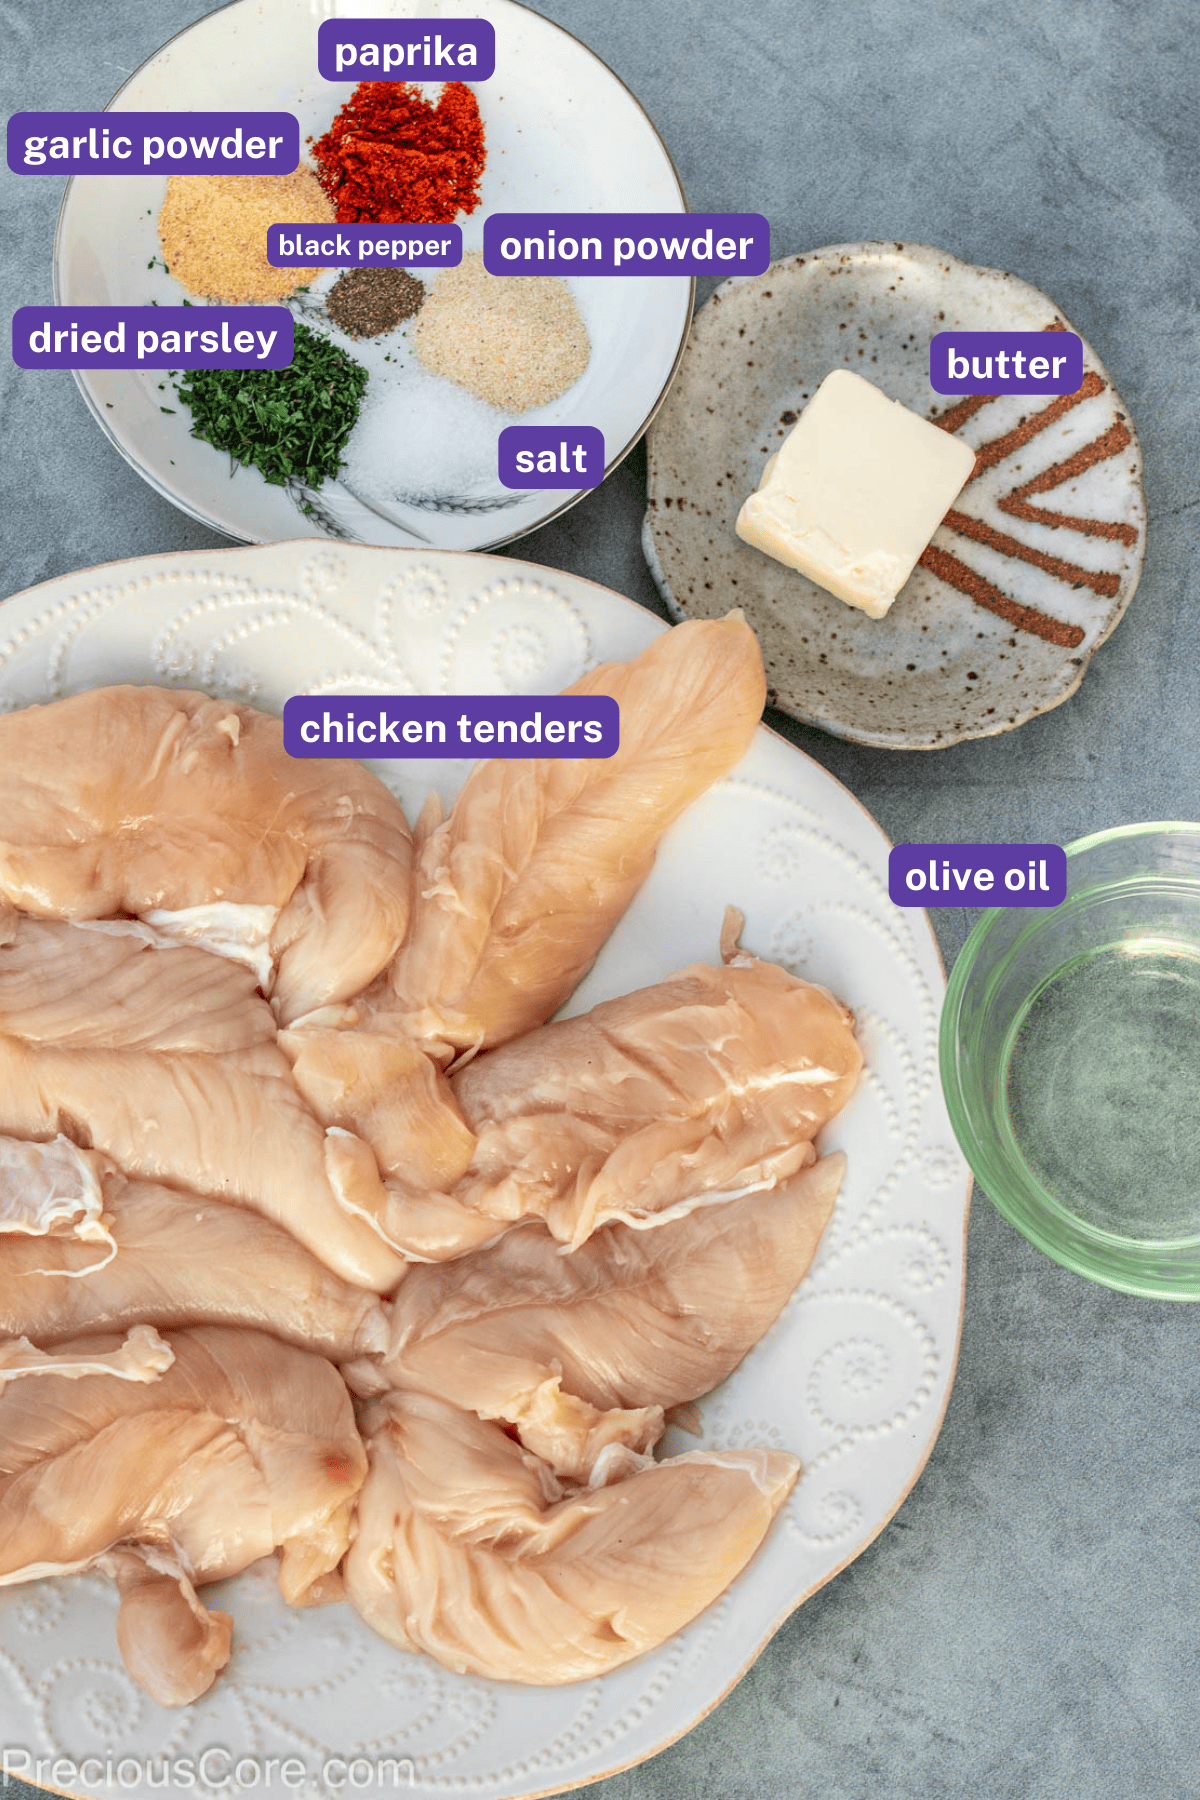 Ingredients for cooked chicken tenders with labels.